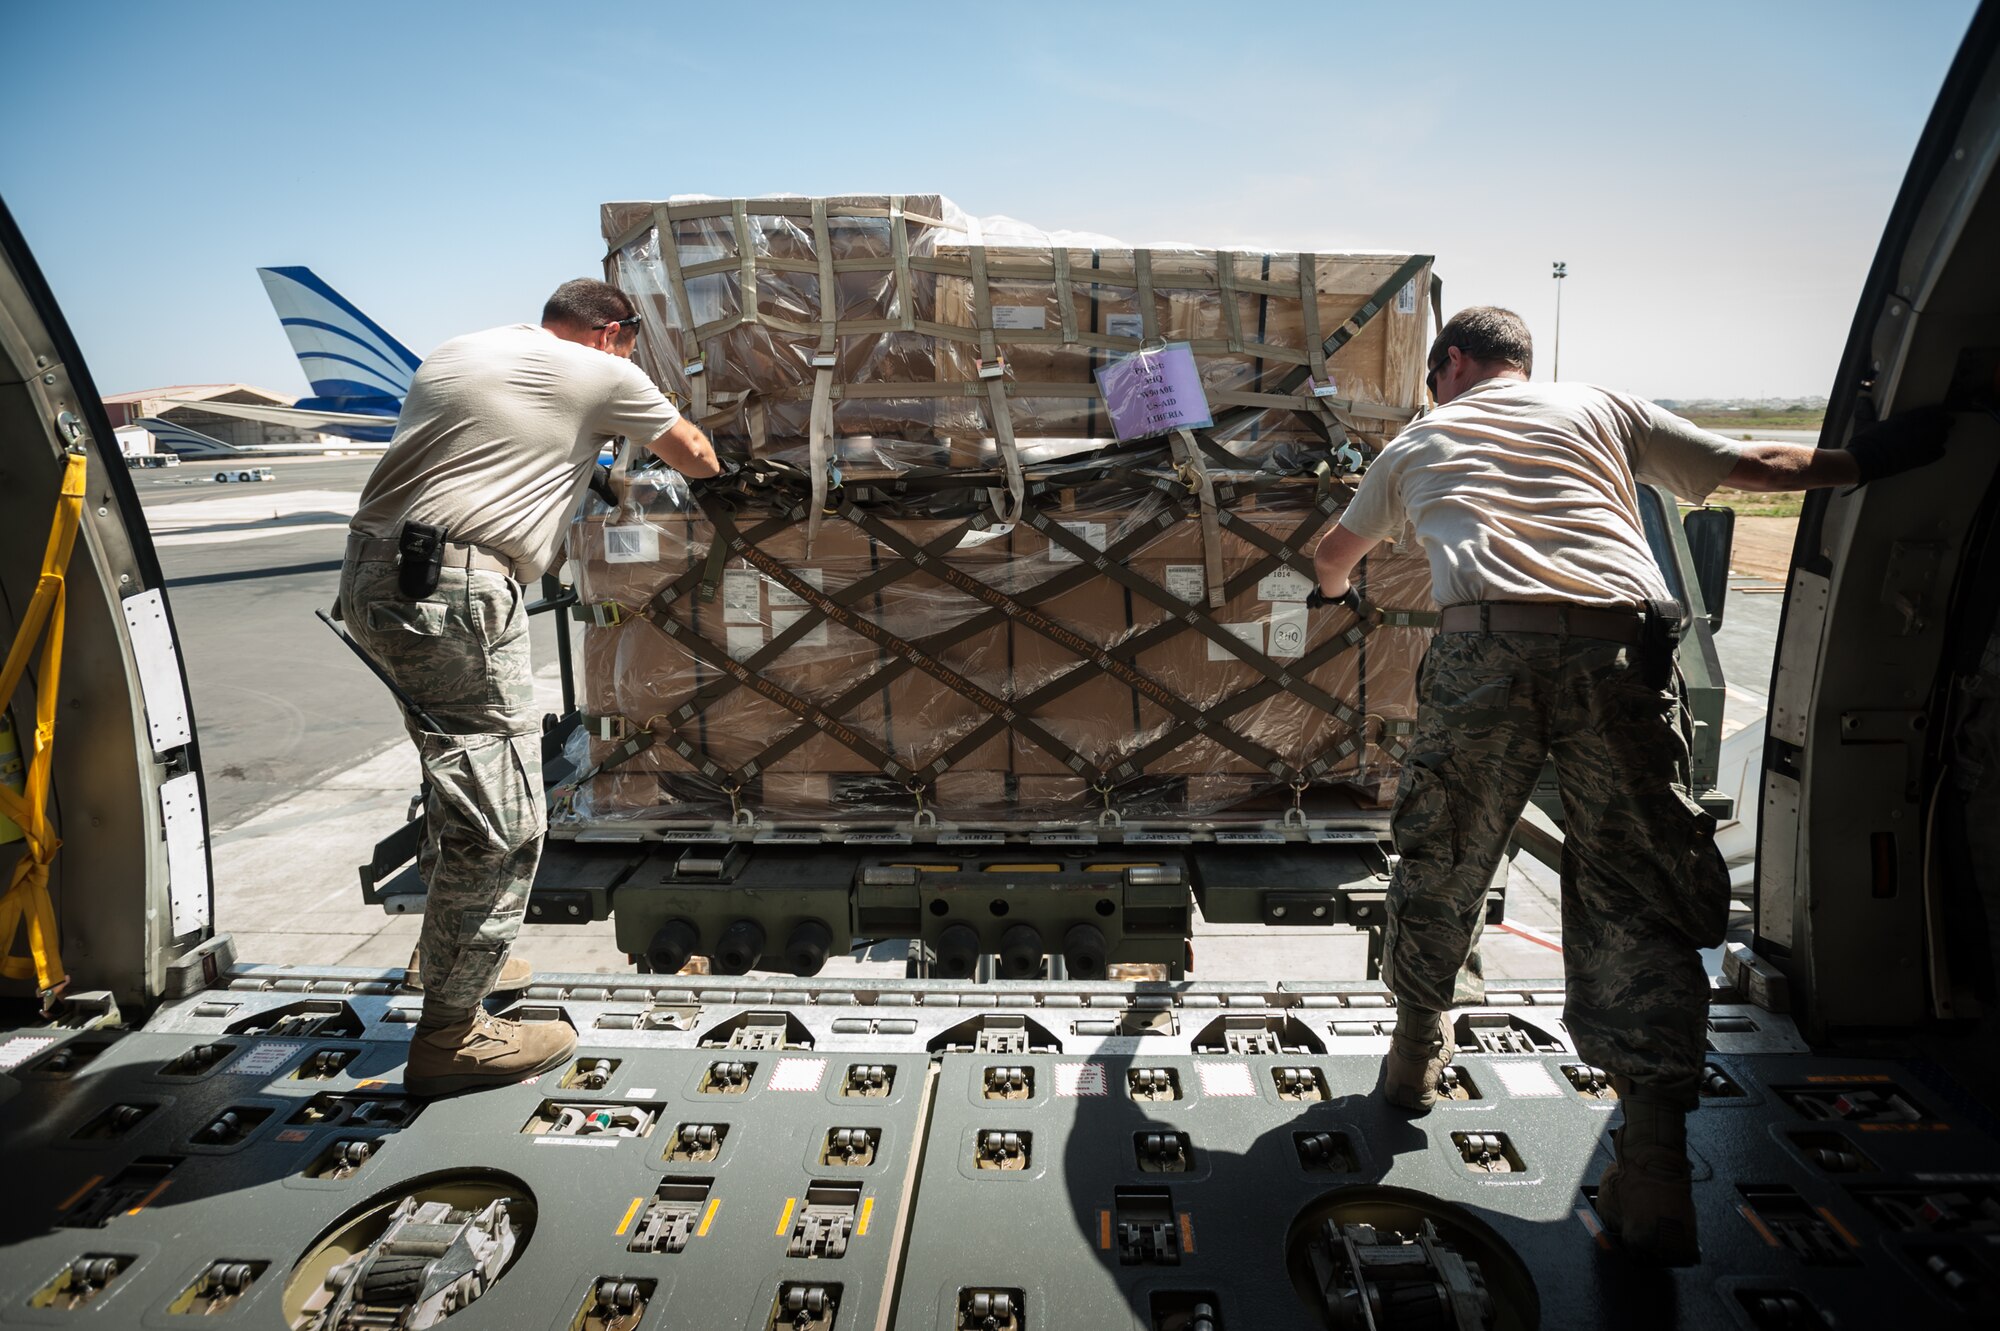 Aerial porters from the Kentucky Air National Guard’s 123rd Contingency Response Group offload pallets of humanitarian aid from a KC-10 Extender onto a Halverson cargo-handling vehicle Nov. 12, 2014, at the Léopold Sédar Senghor International Airport in Dakar, Senegal. The Kentucky Airmen will stage the cargo in Senegal before transferring it to C-130J Super Hercules for delivery into Monrovia, Liberia, in support of Operation United Assistance, the U.S. Agency for International Development-led, whole-of-government effort to contain the Ebola virus outbreak in West Africa. (U.S. Air National Guard photo/Maj. Dale Greer)